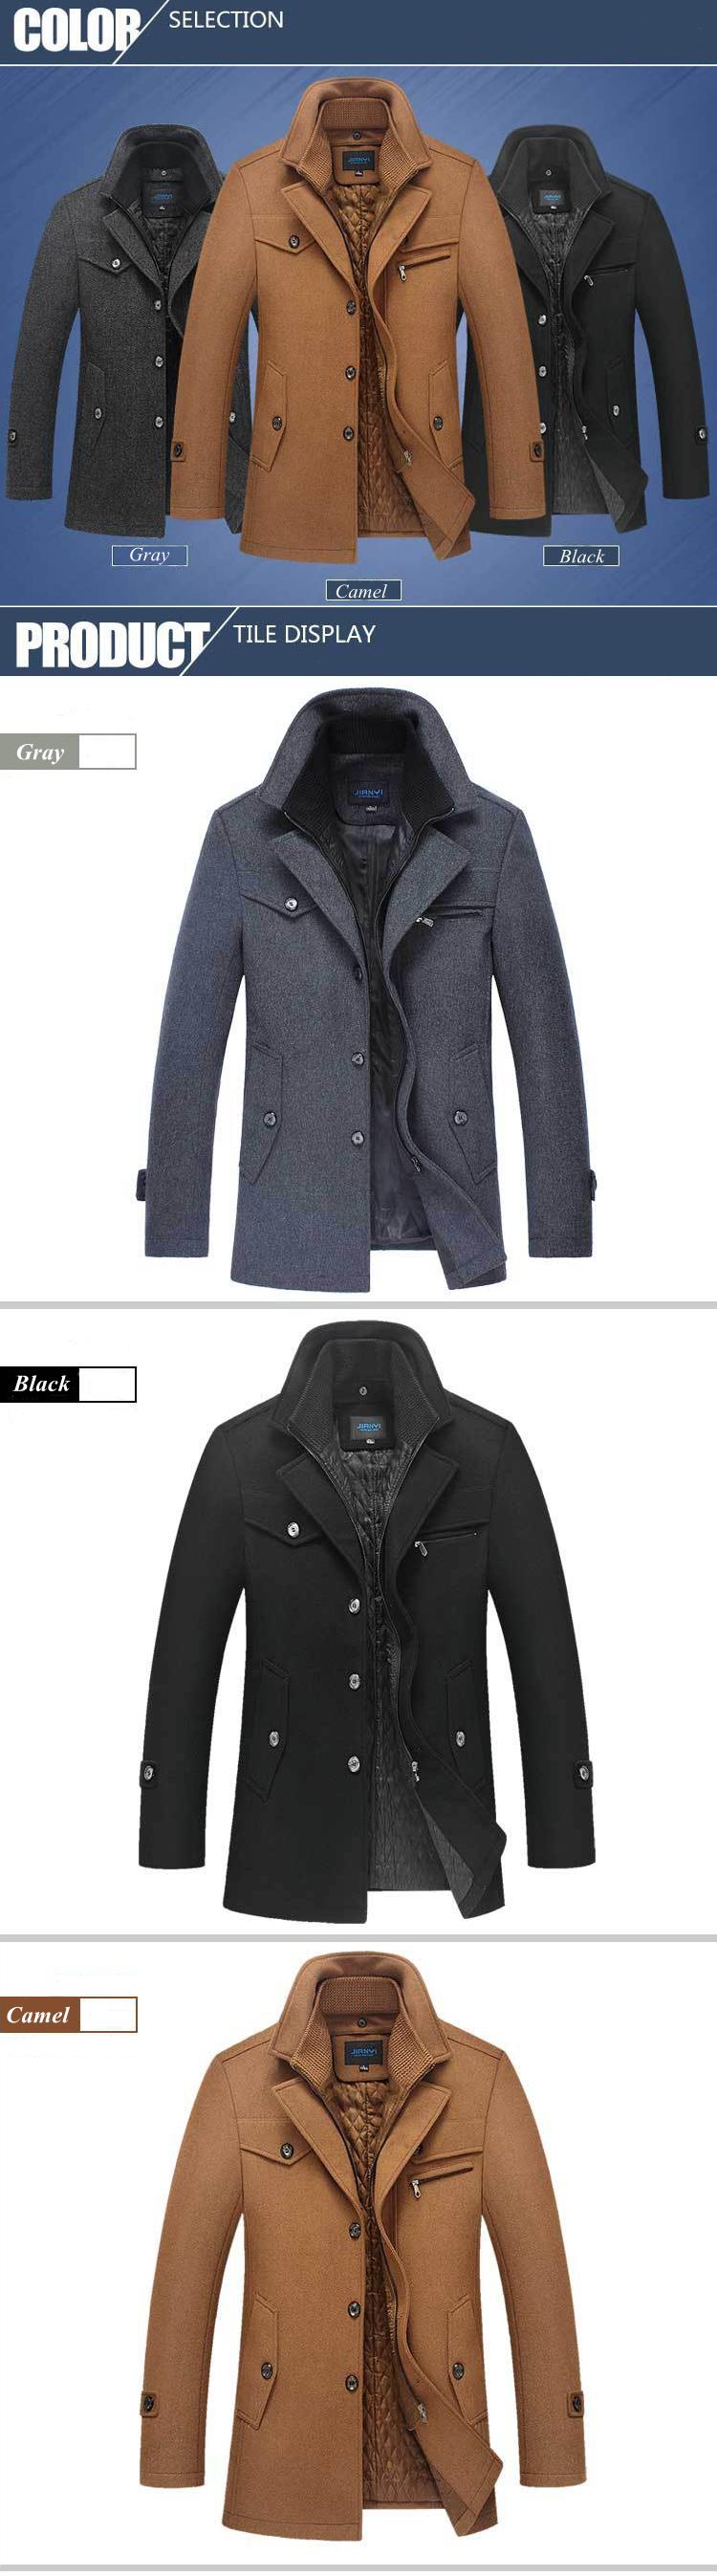 Autumn-Winter-Fashion-Business-Double-Collar-Casual-Jacket-Mens-Wool-Warm-Jacket-Long-Trench-Coat-1094579